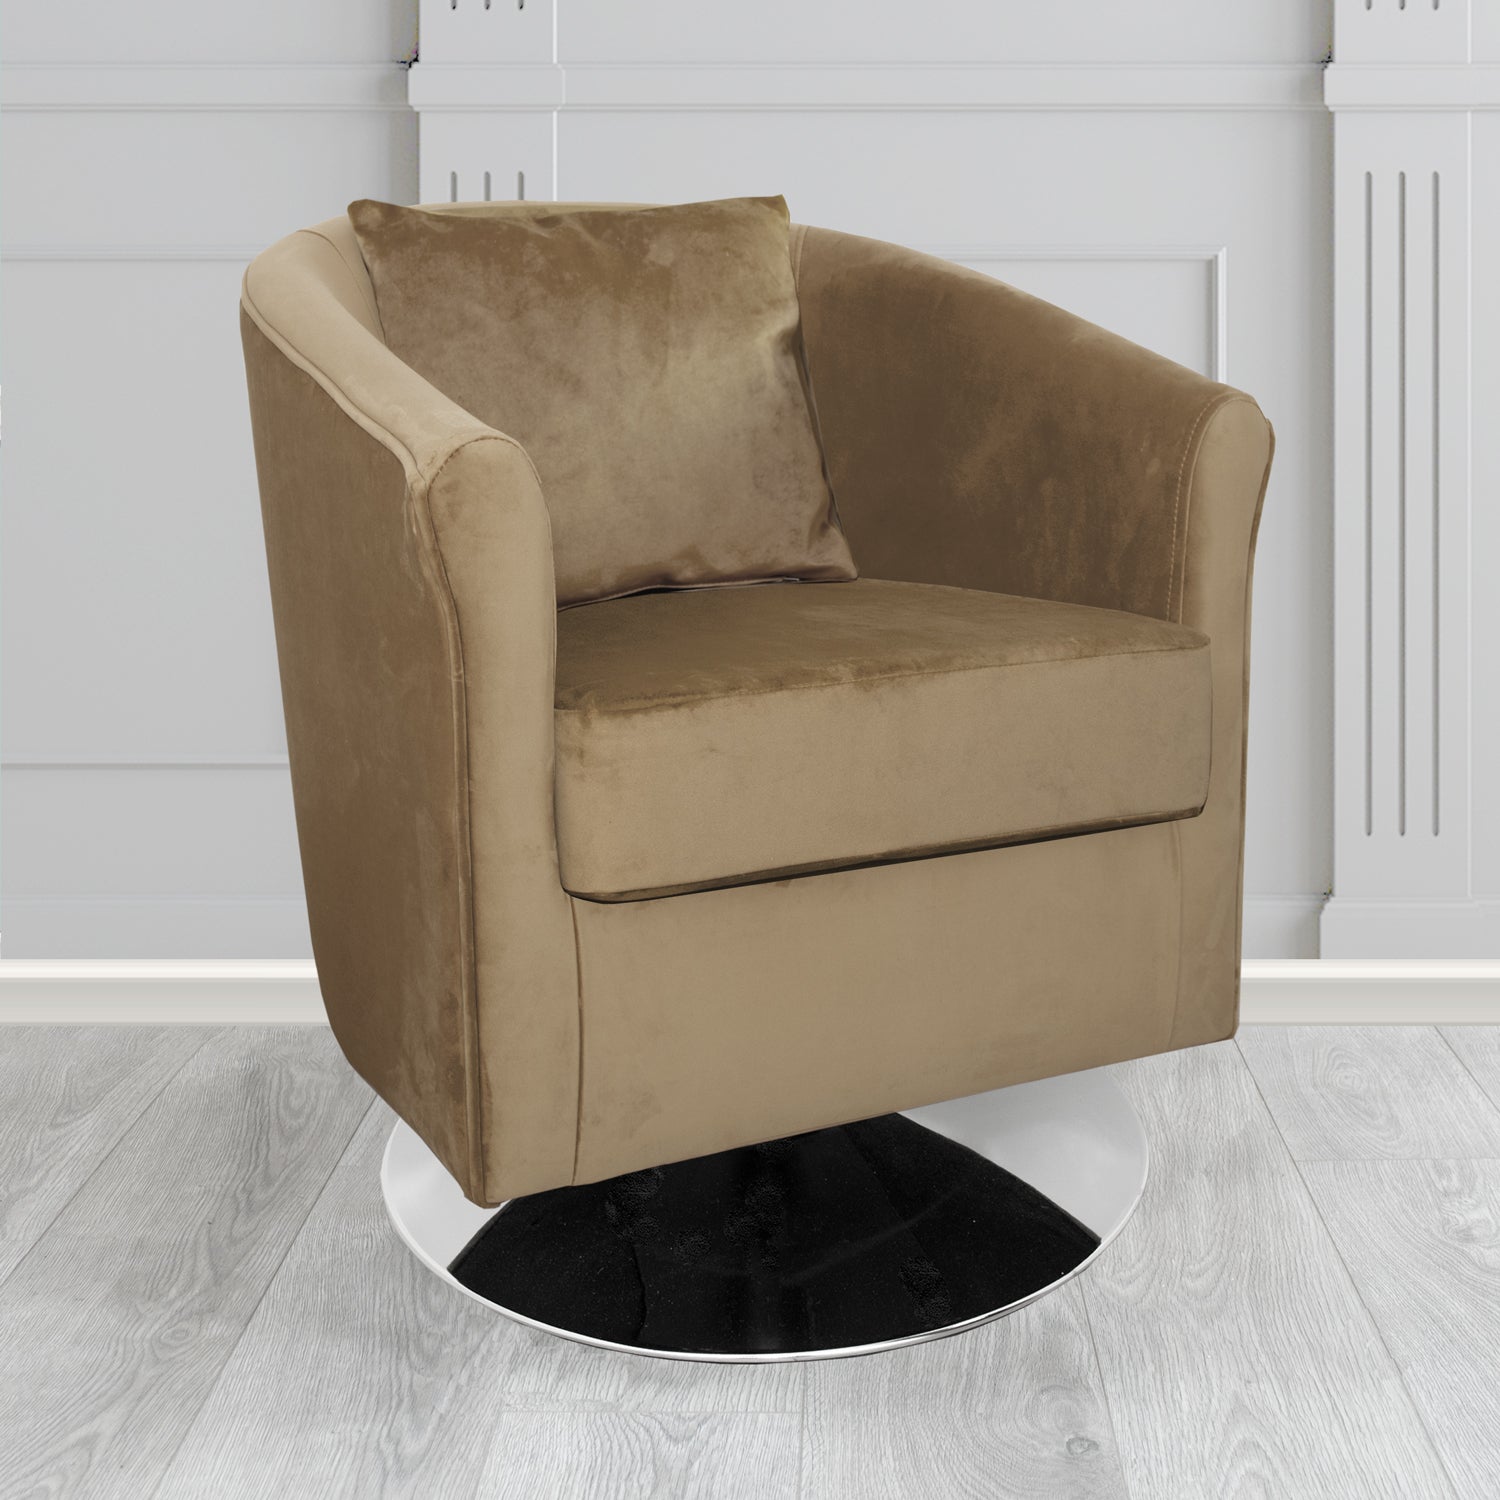 St Tropez Monaco Biscuit Plush Velvet Fabric Swivel Tub Chair with Scatter Cushion (6604933496874)